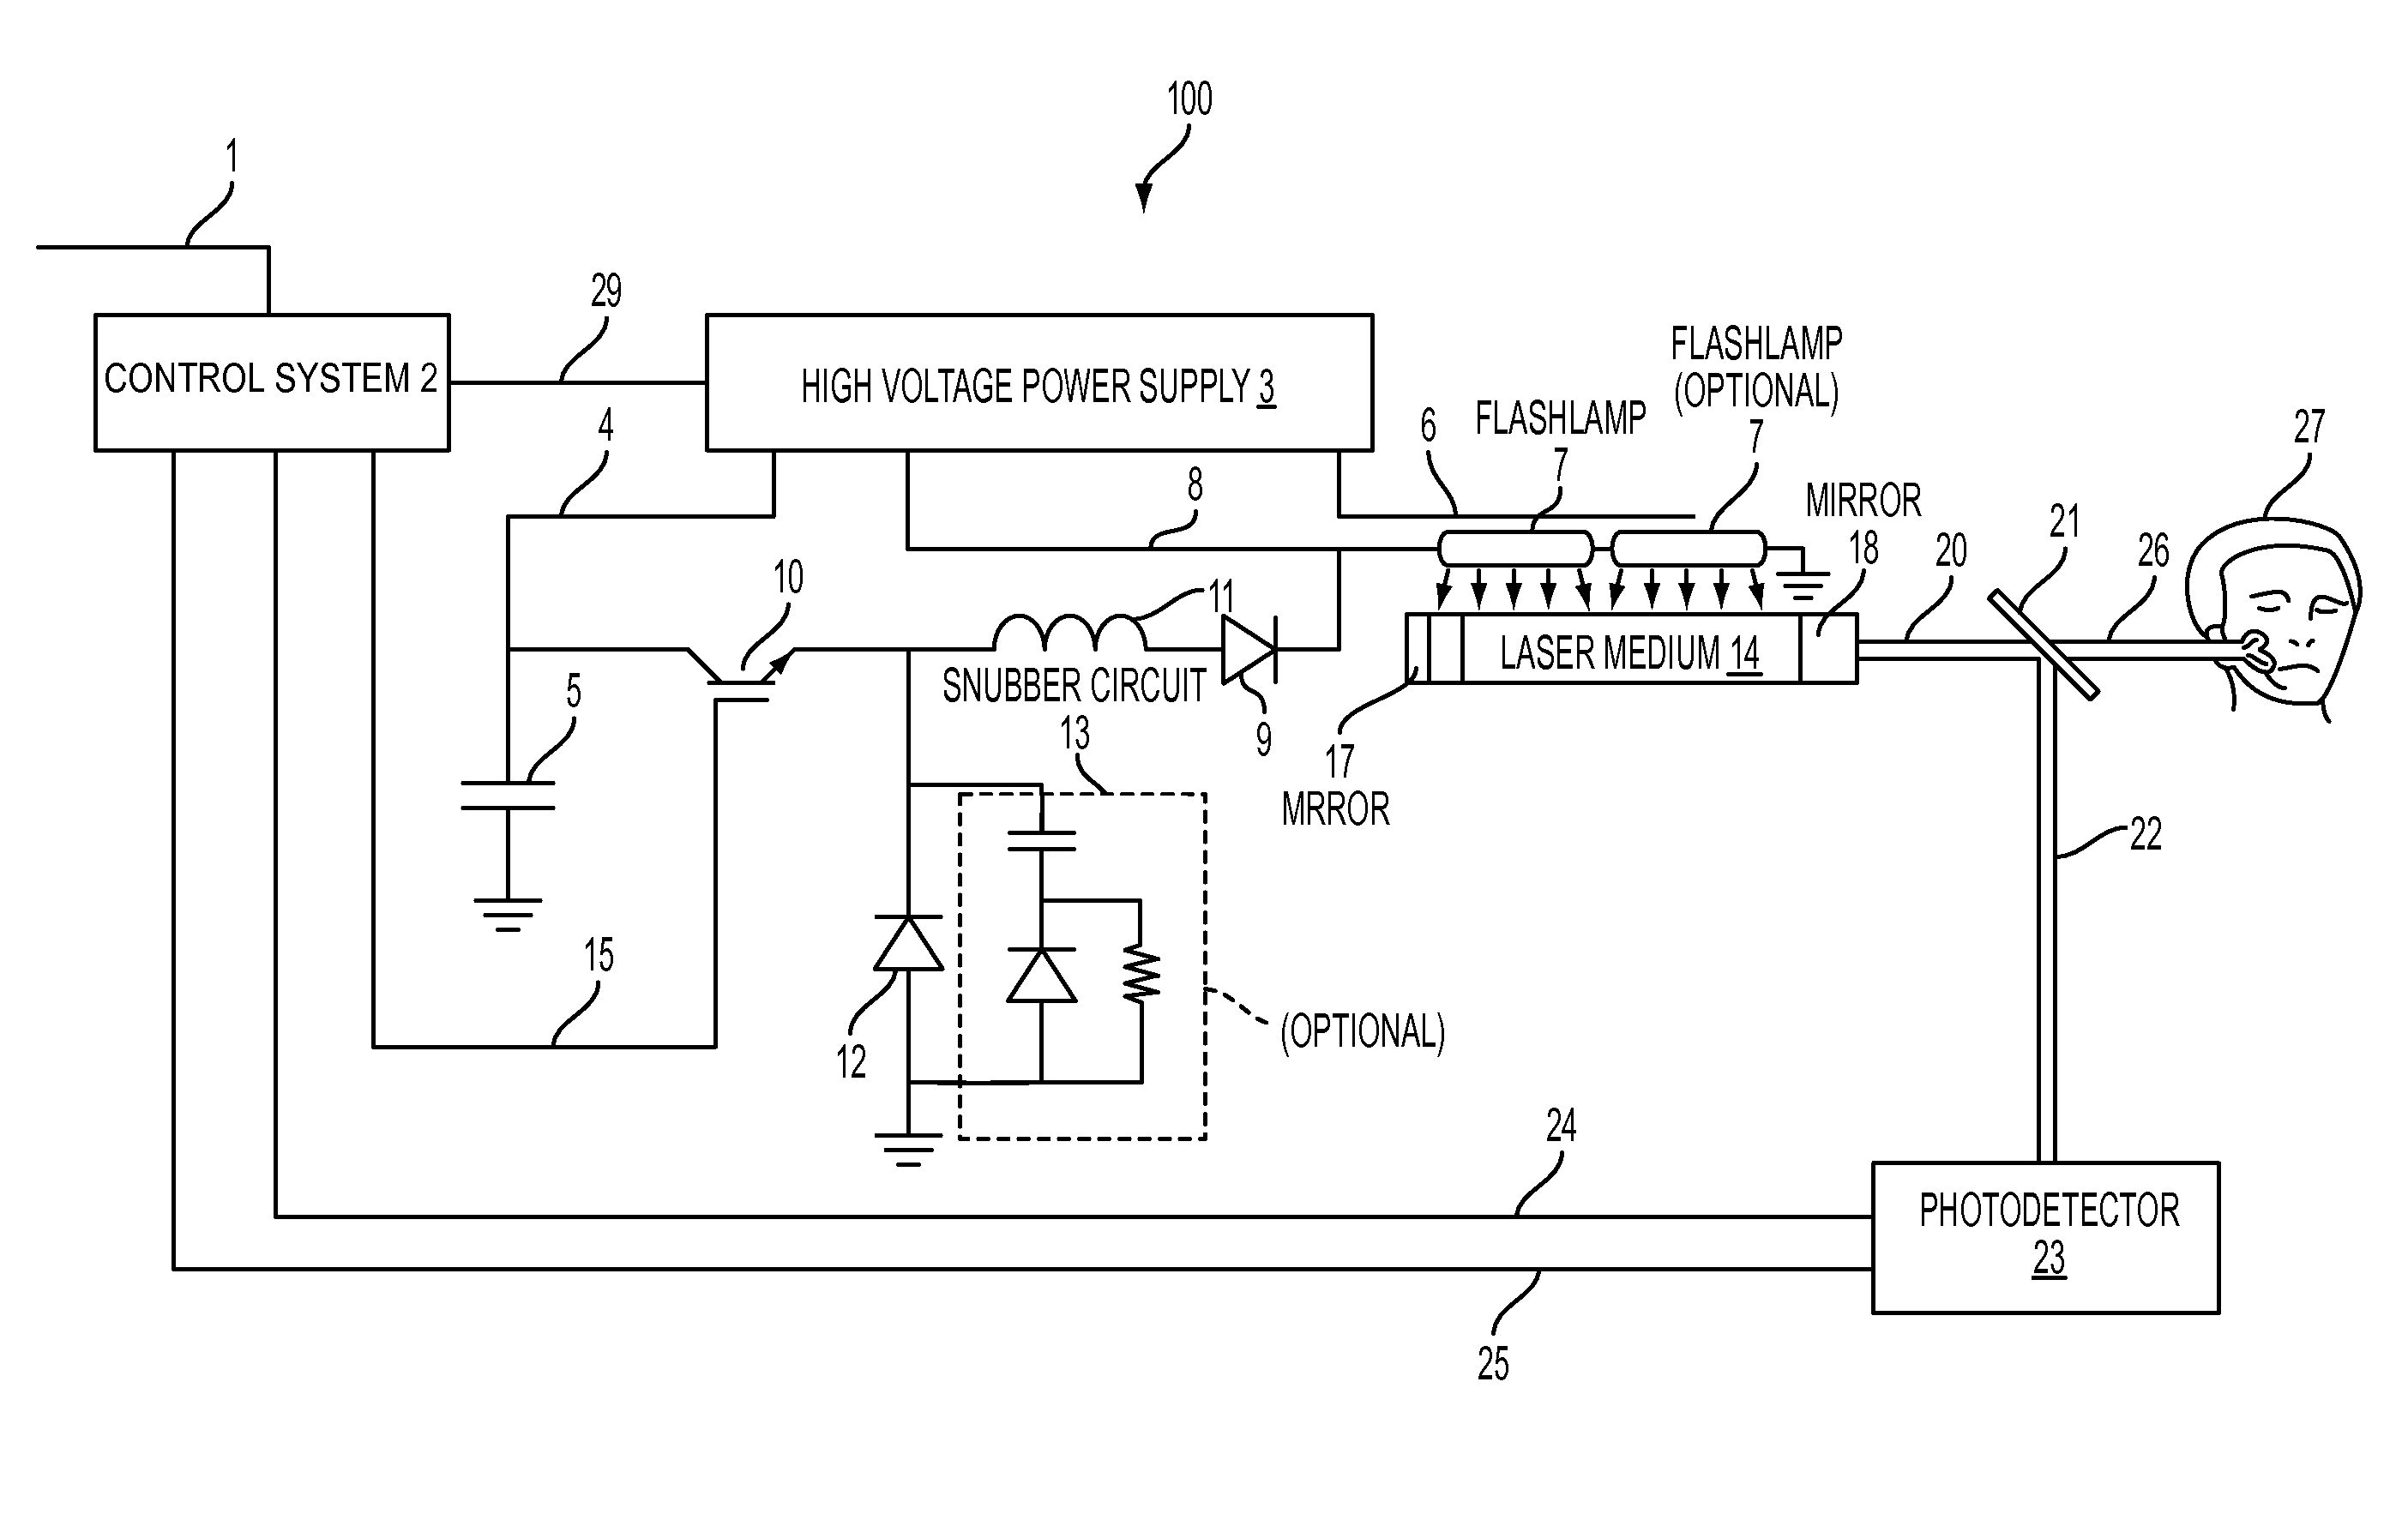 Voltage bucking circuit for driving flashlamp-pumped lasers for treating skin